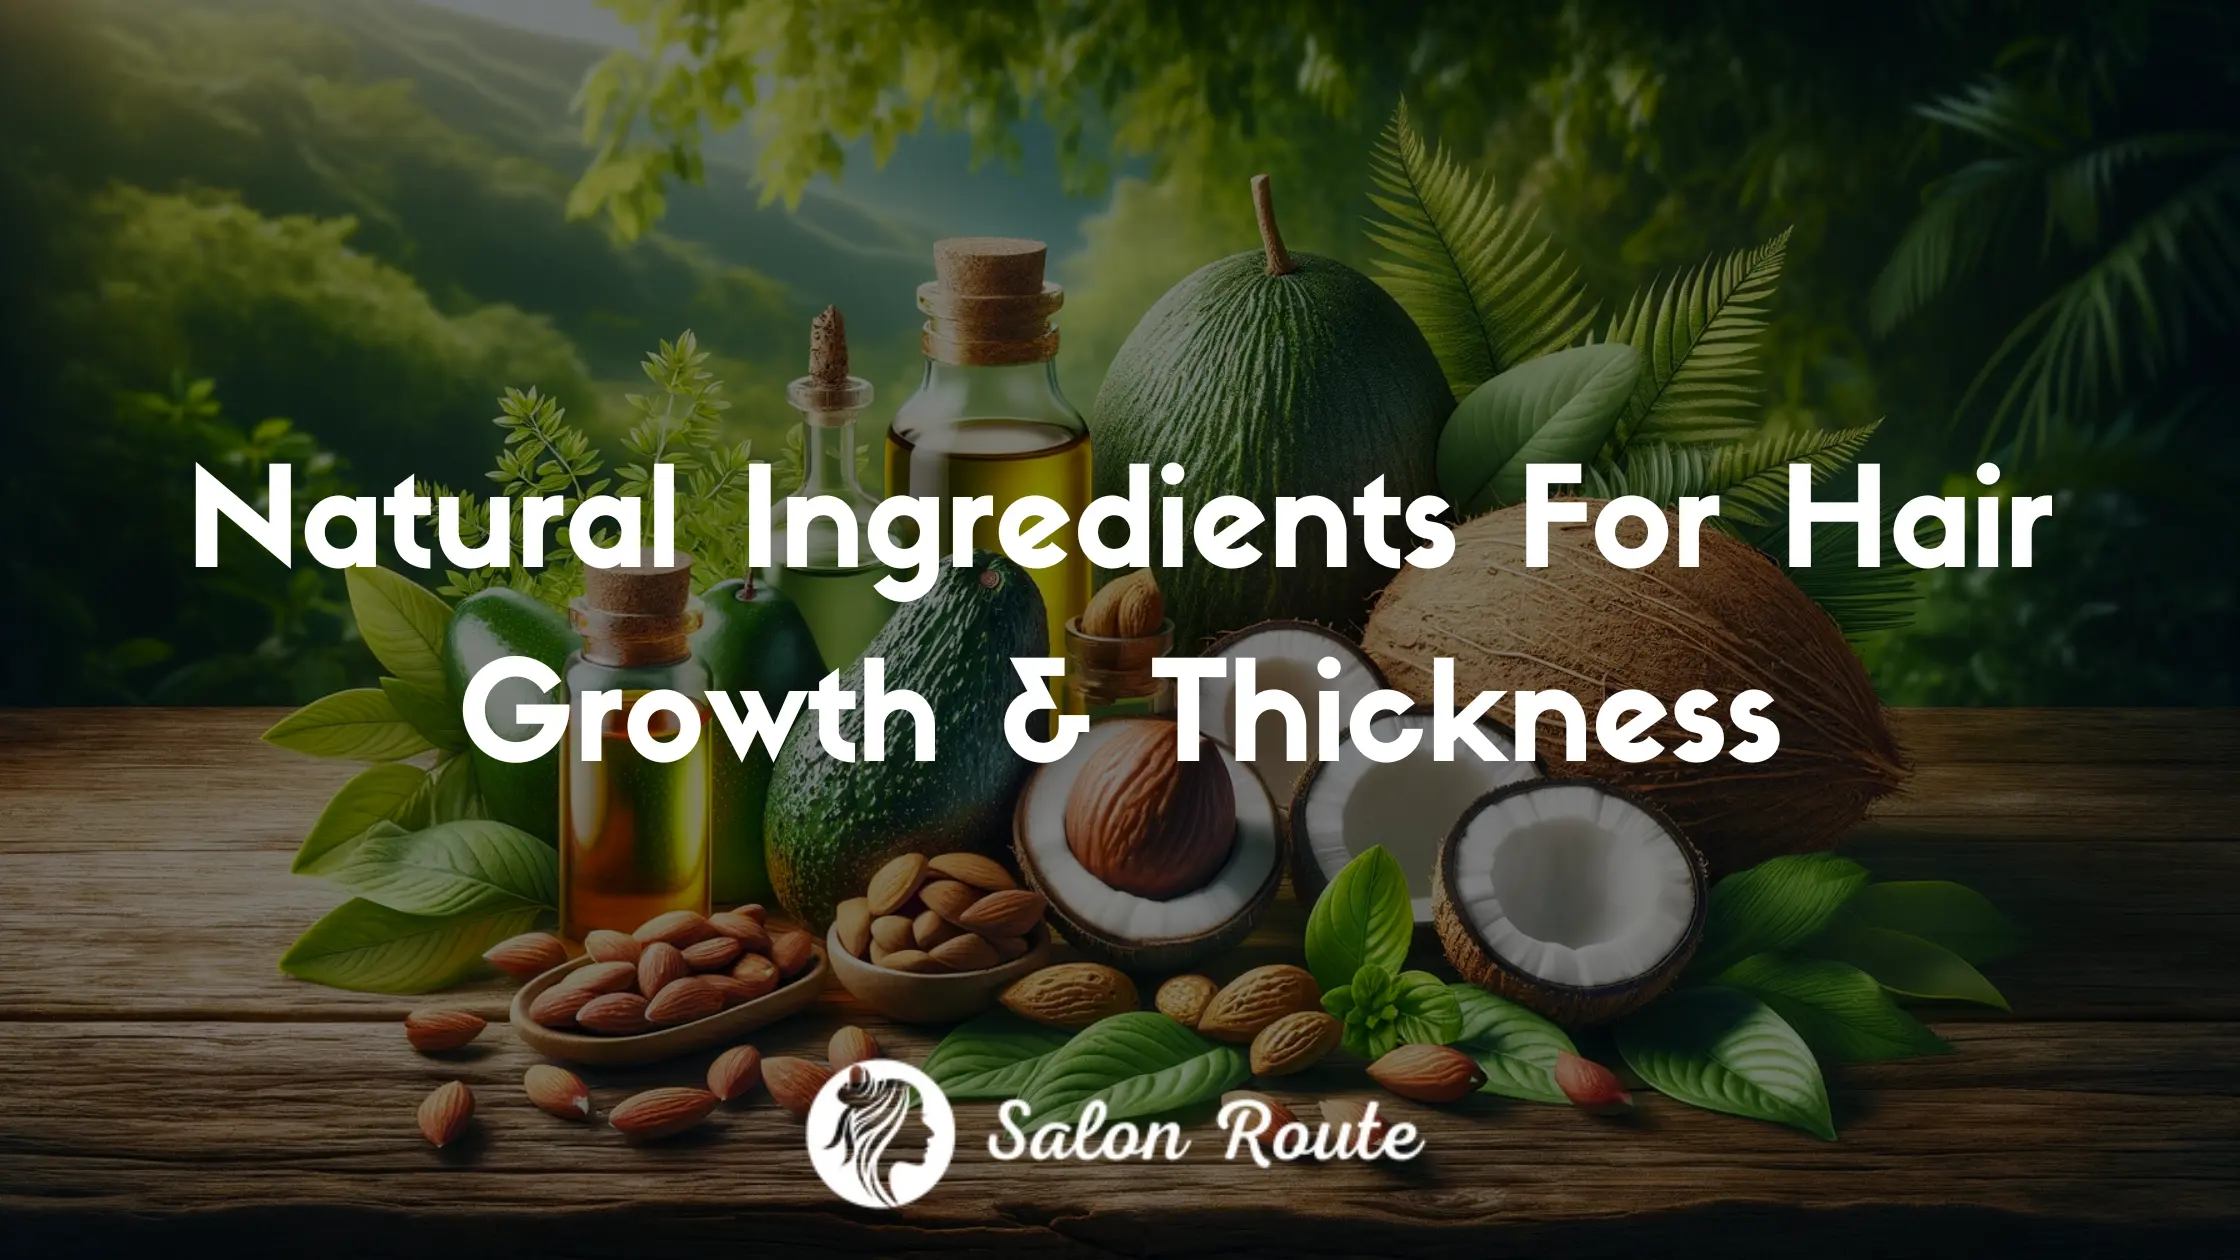 Natural Ingredients For Hair Growth and Thickness